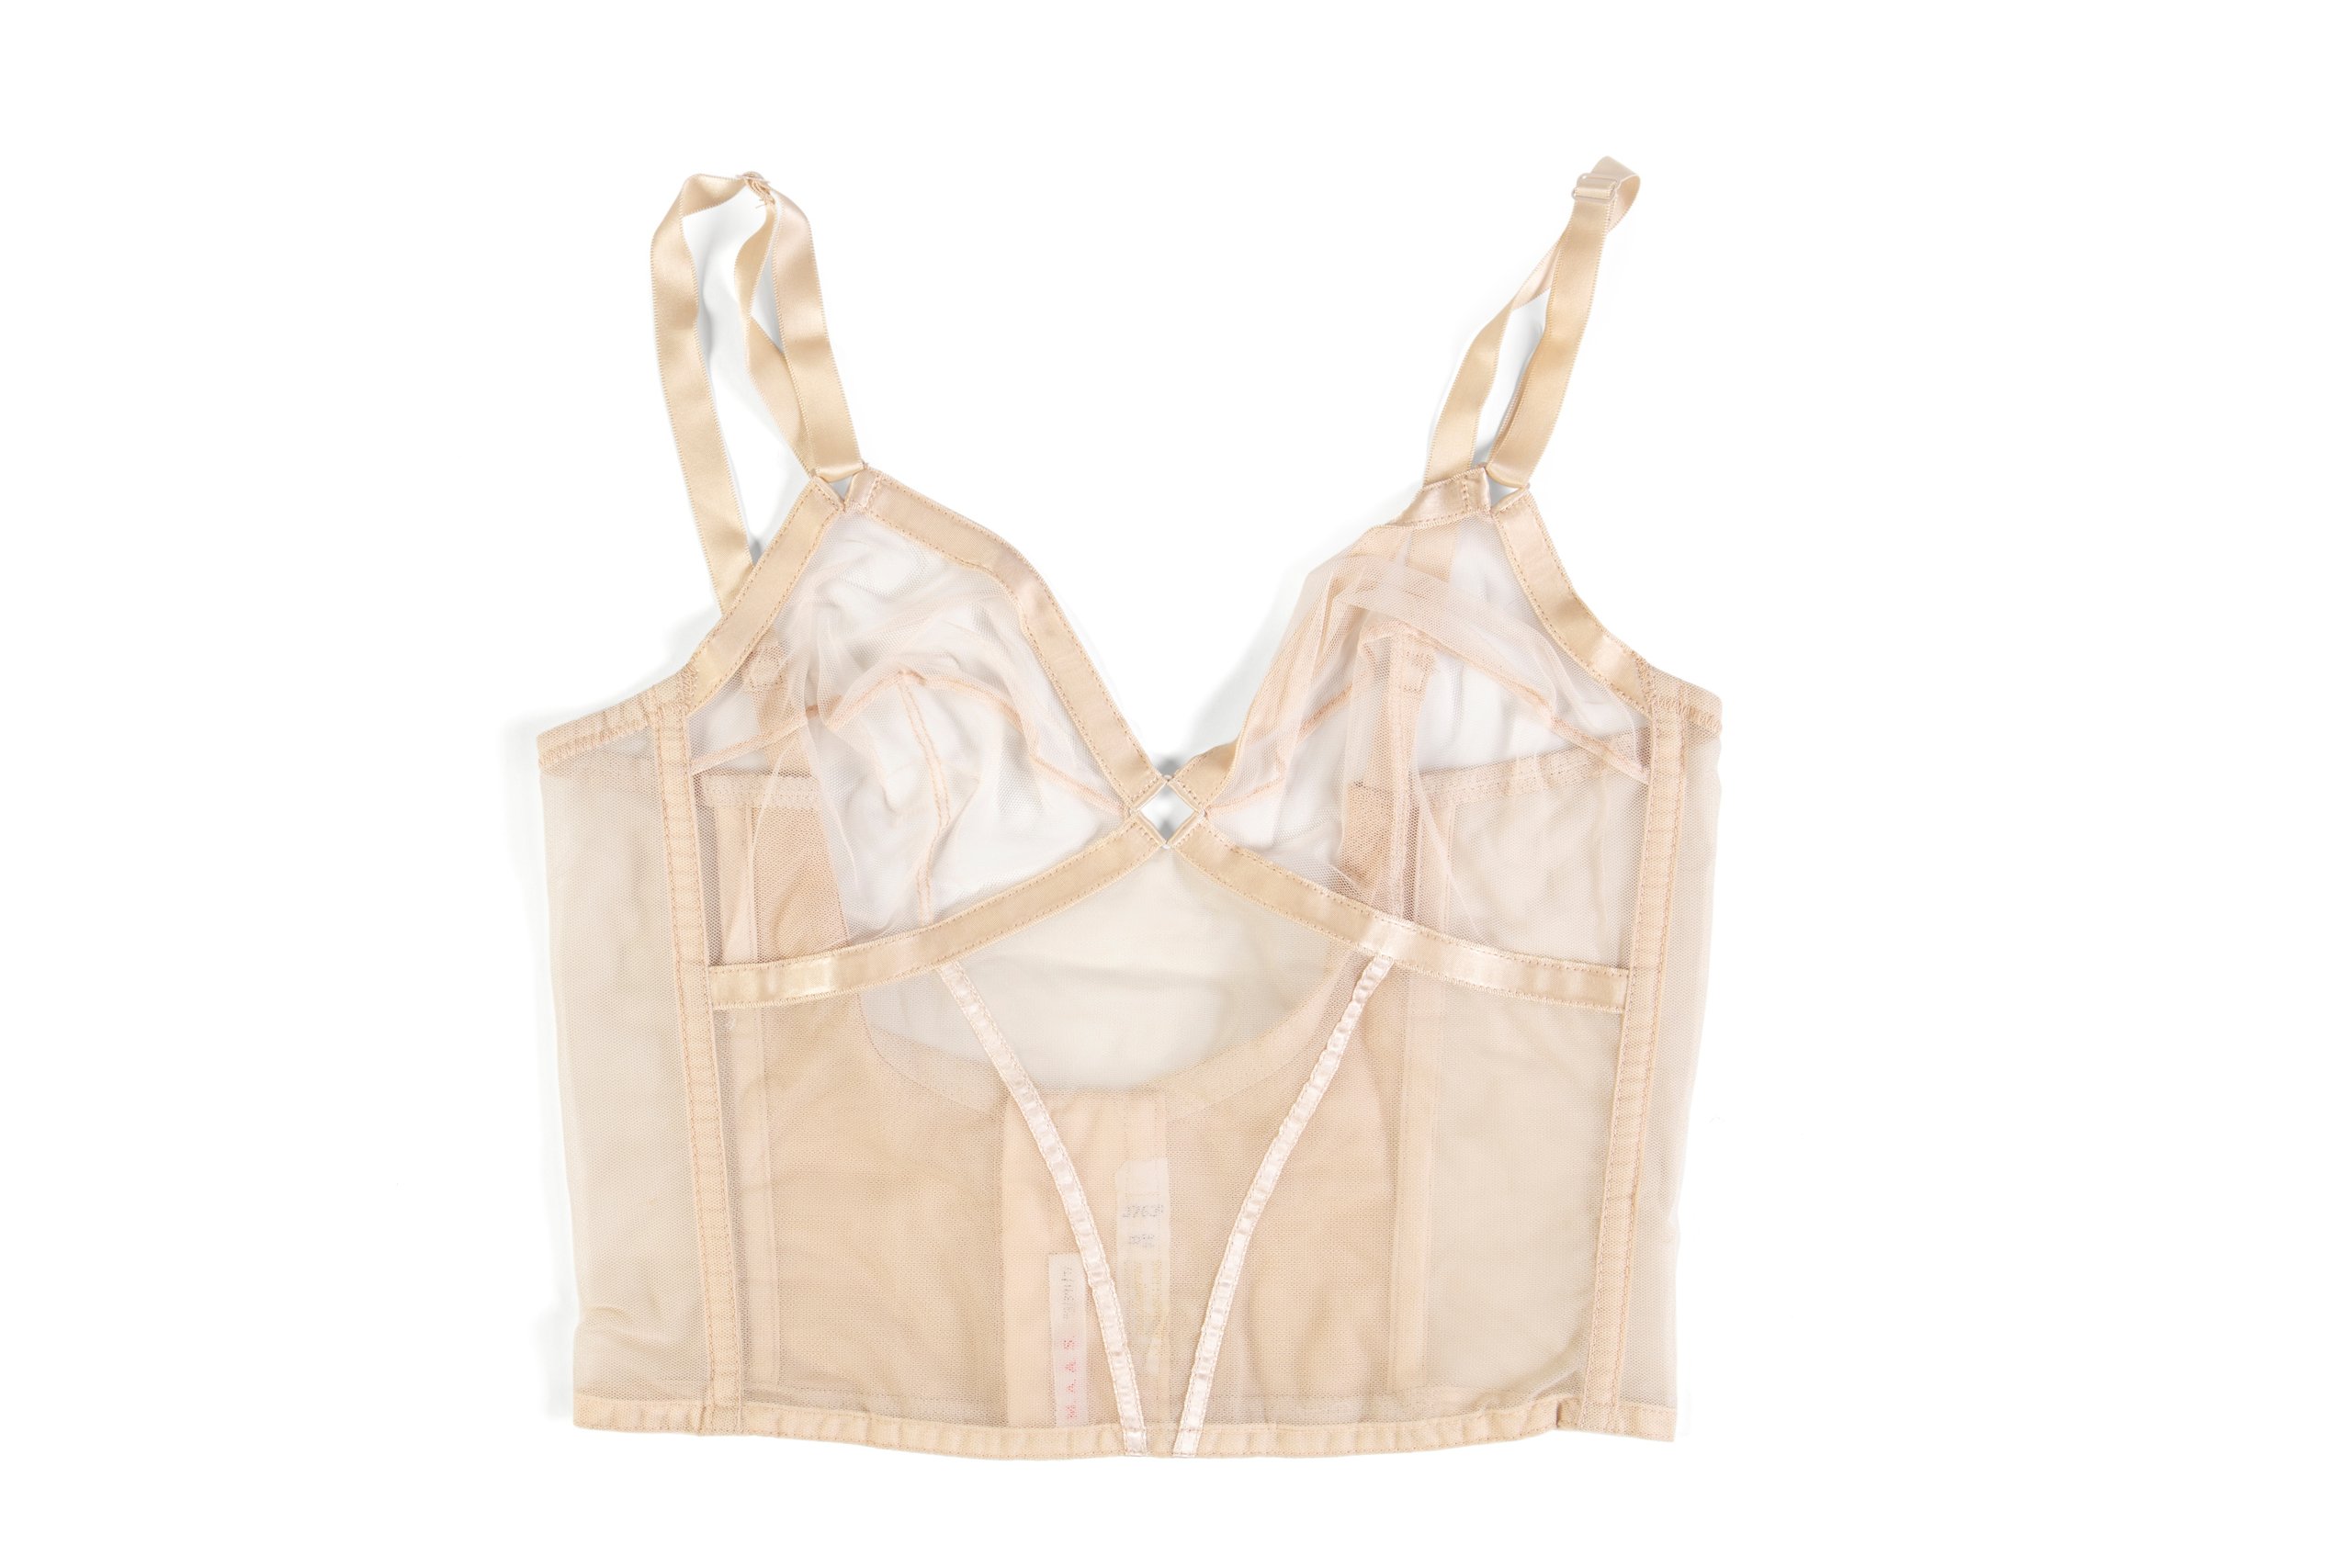 Powerhouse Collection - Womens 'Sweet Nothing' longline brassiere